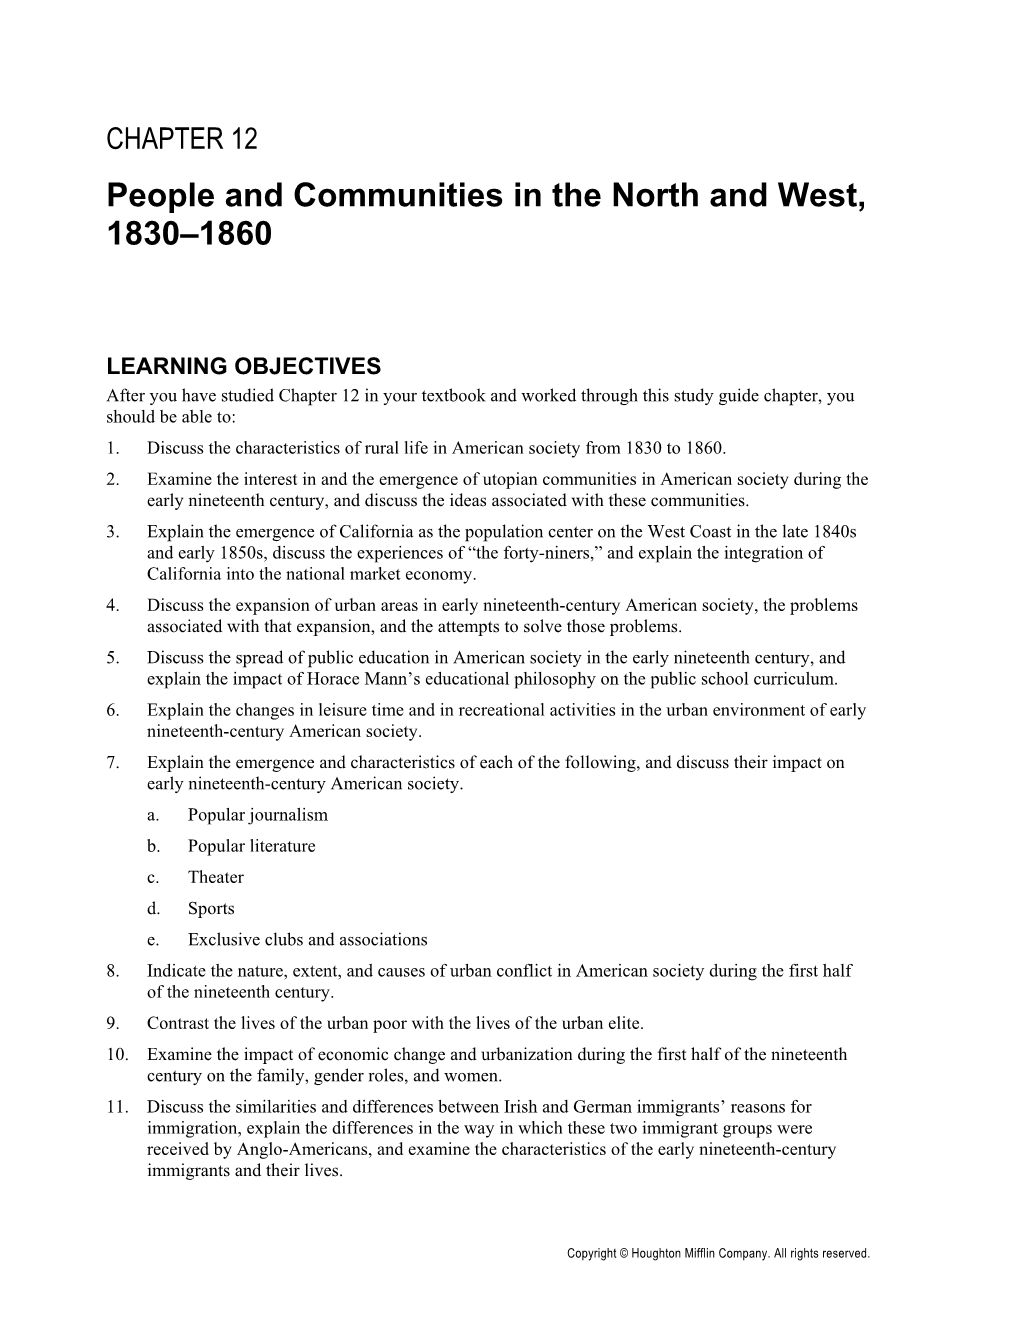 People and Communities in the North and West, 1830–1860